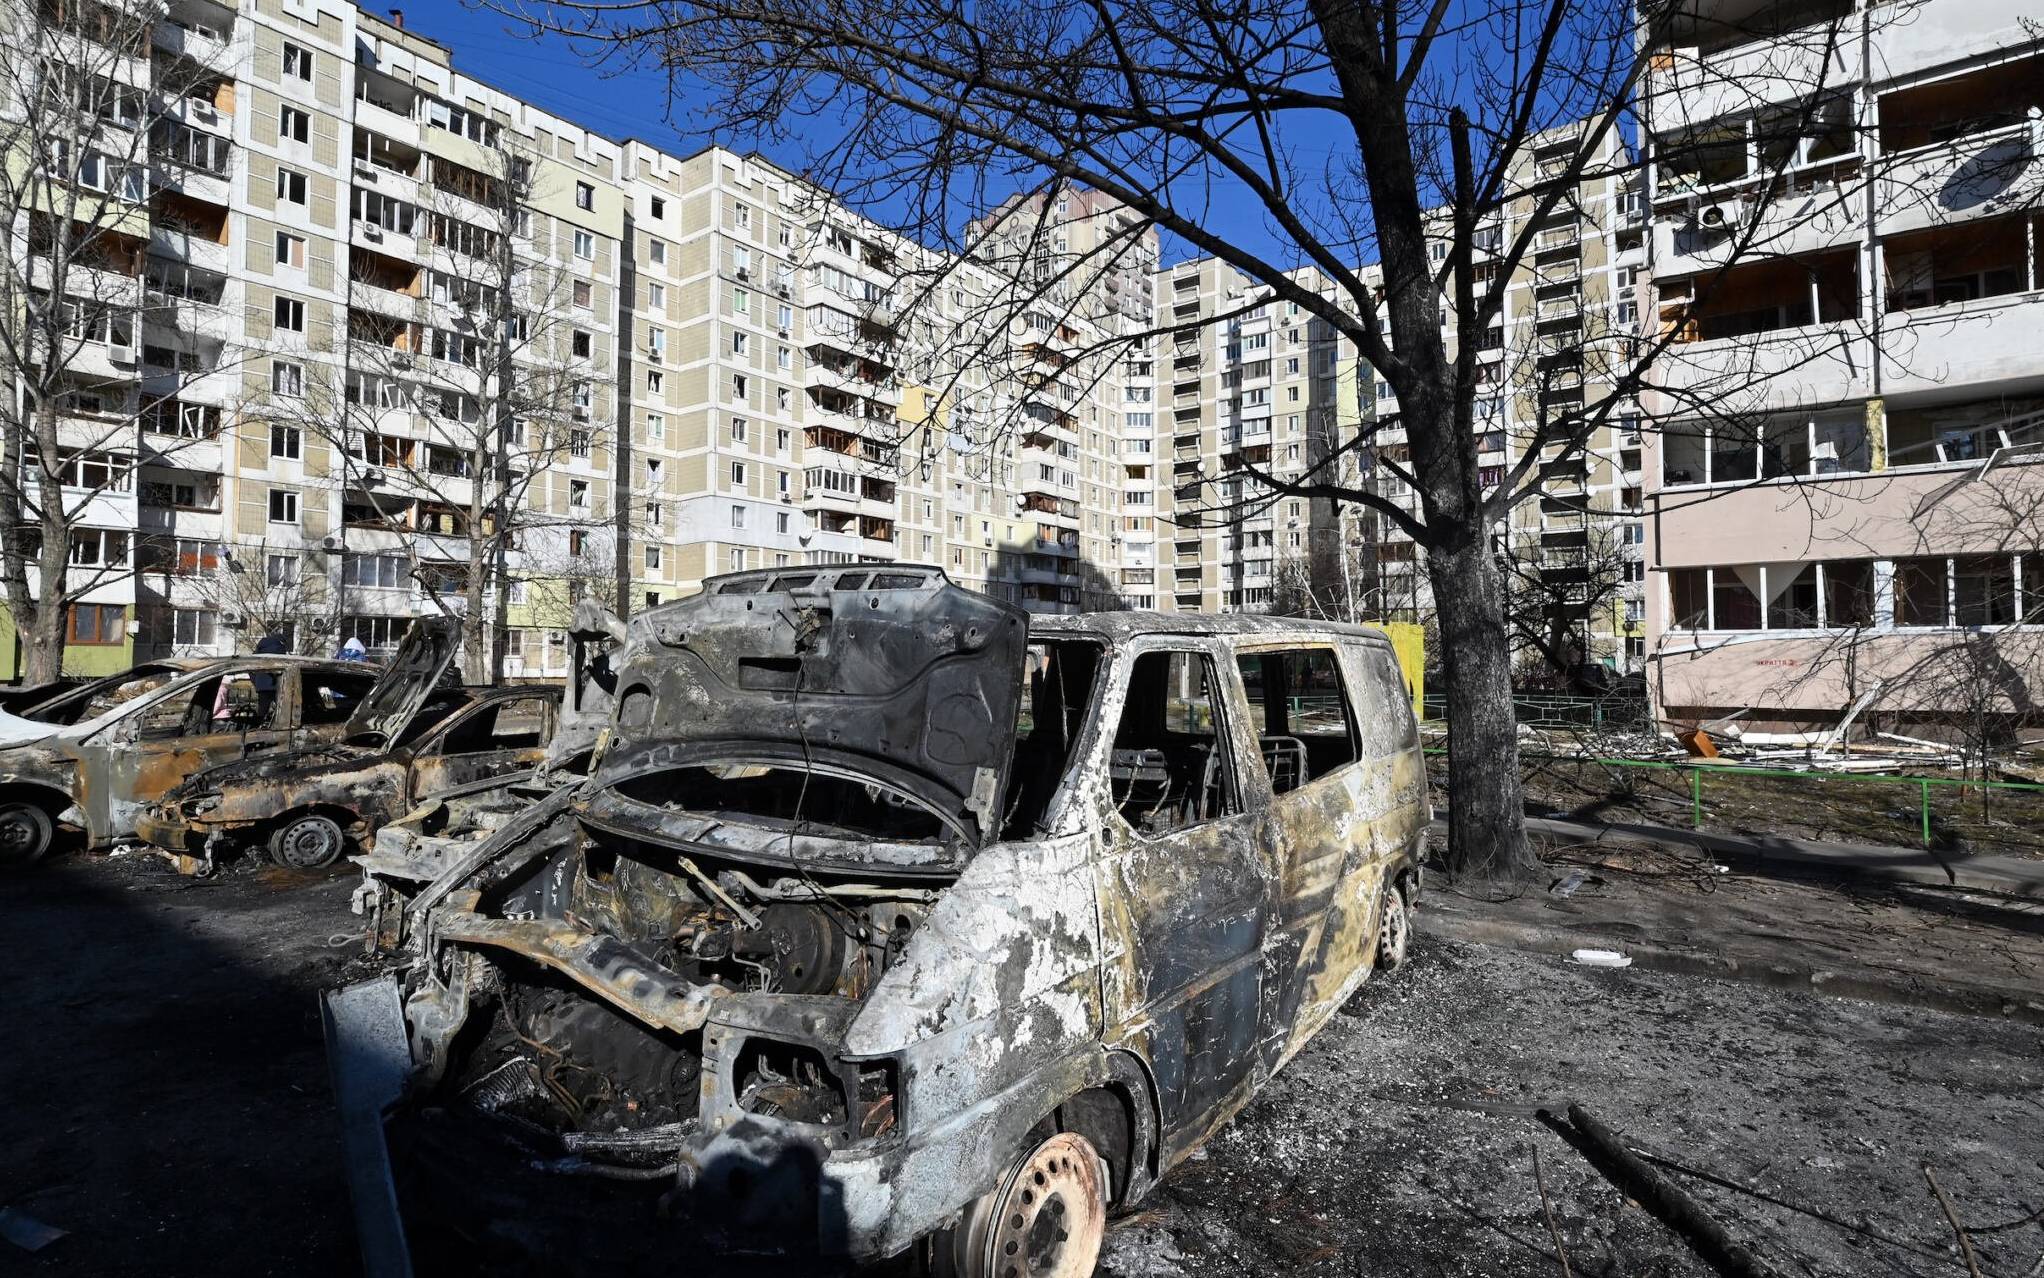 A view of the cars which were destroyed by recent shelling in Kyiv outskirts on February 28, 2022. - The UN human rights chief said on February 28, 2022 that at least 102 civilians, including seven children, had been killed in Ukraine since Russia launched its invasion five days ago, warning the true numbers were likely far higher. (Photo by Genya SAVILOV / AFP)